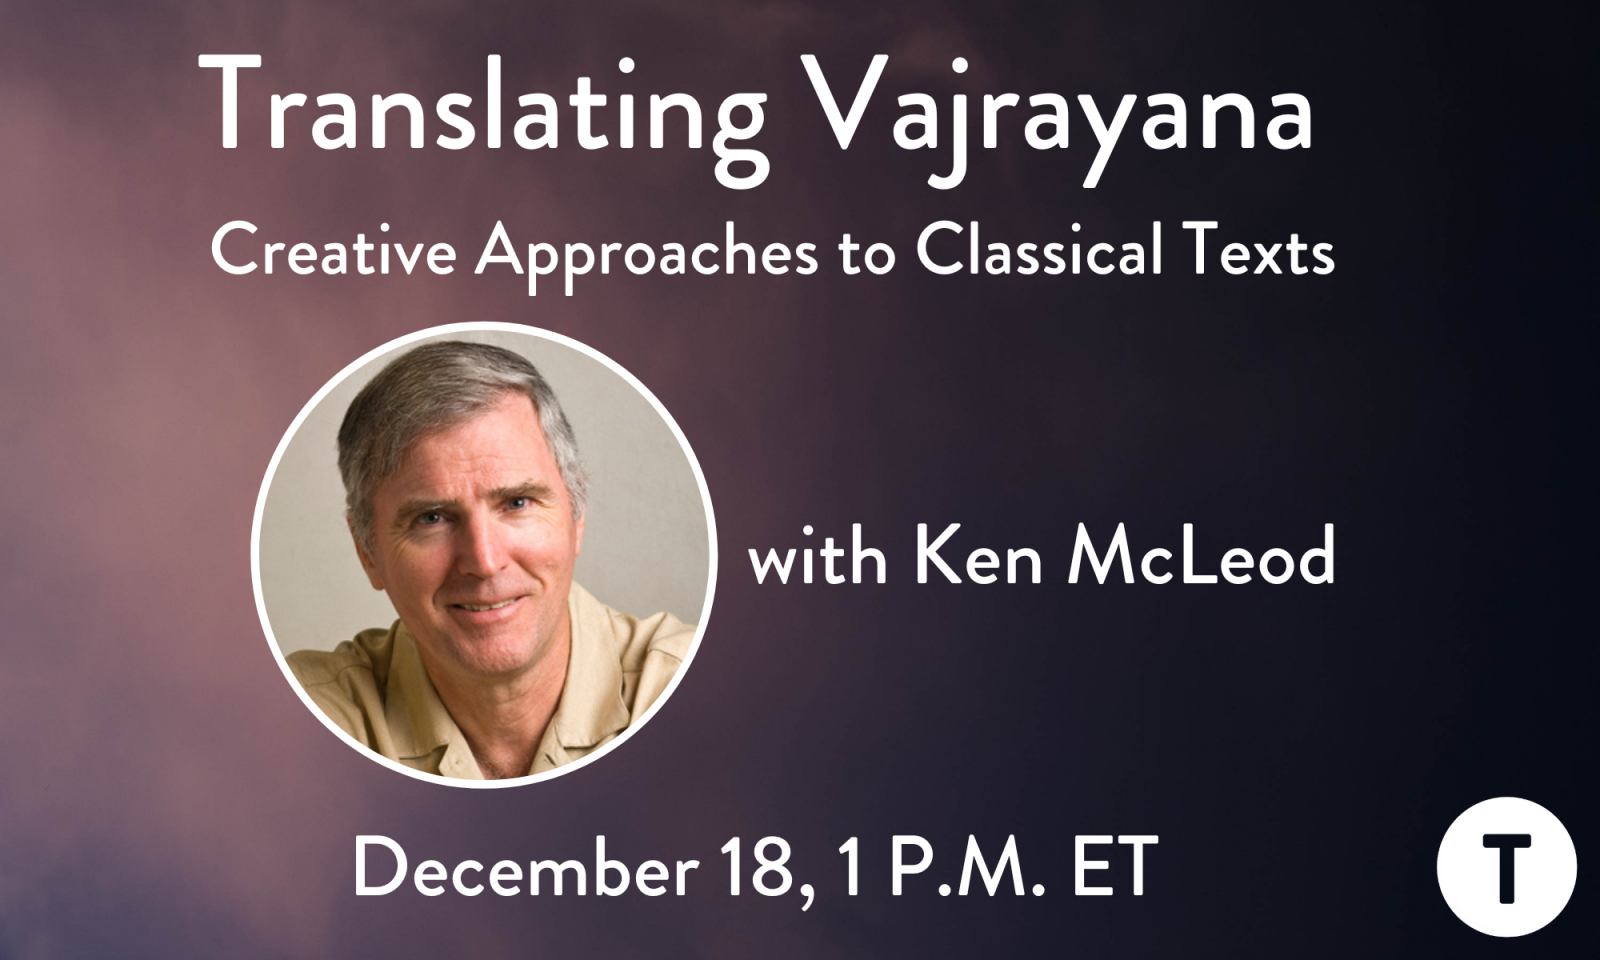 Translating Vajrayana: Creative Approaches to Classical Texts with Ken McLeod. December 18, 1 P.M. ET